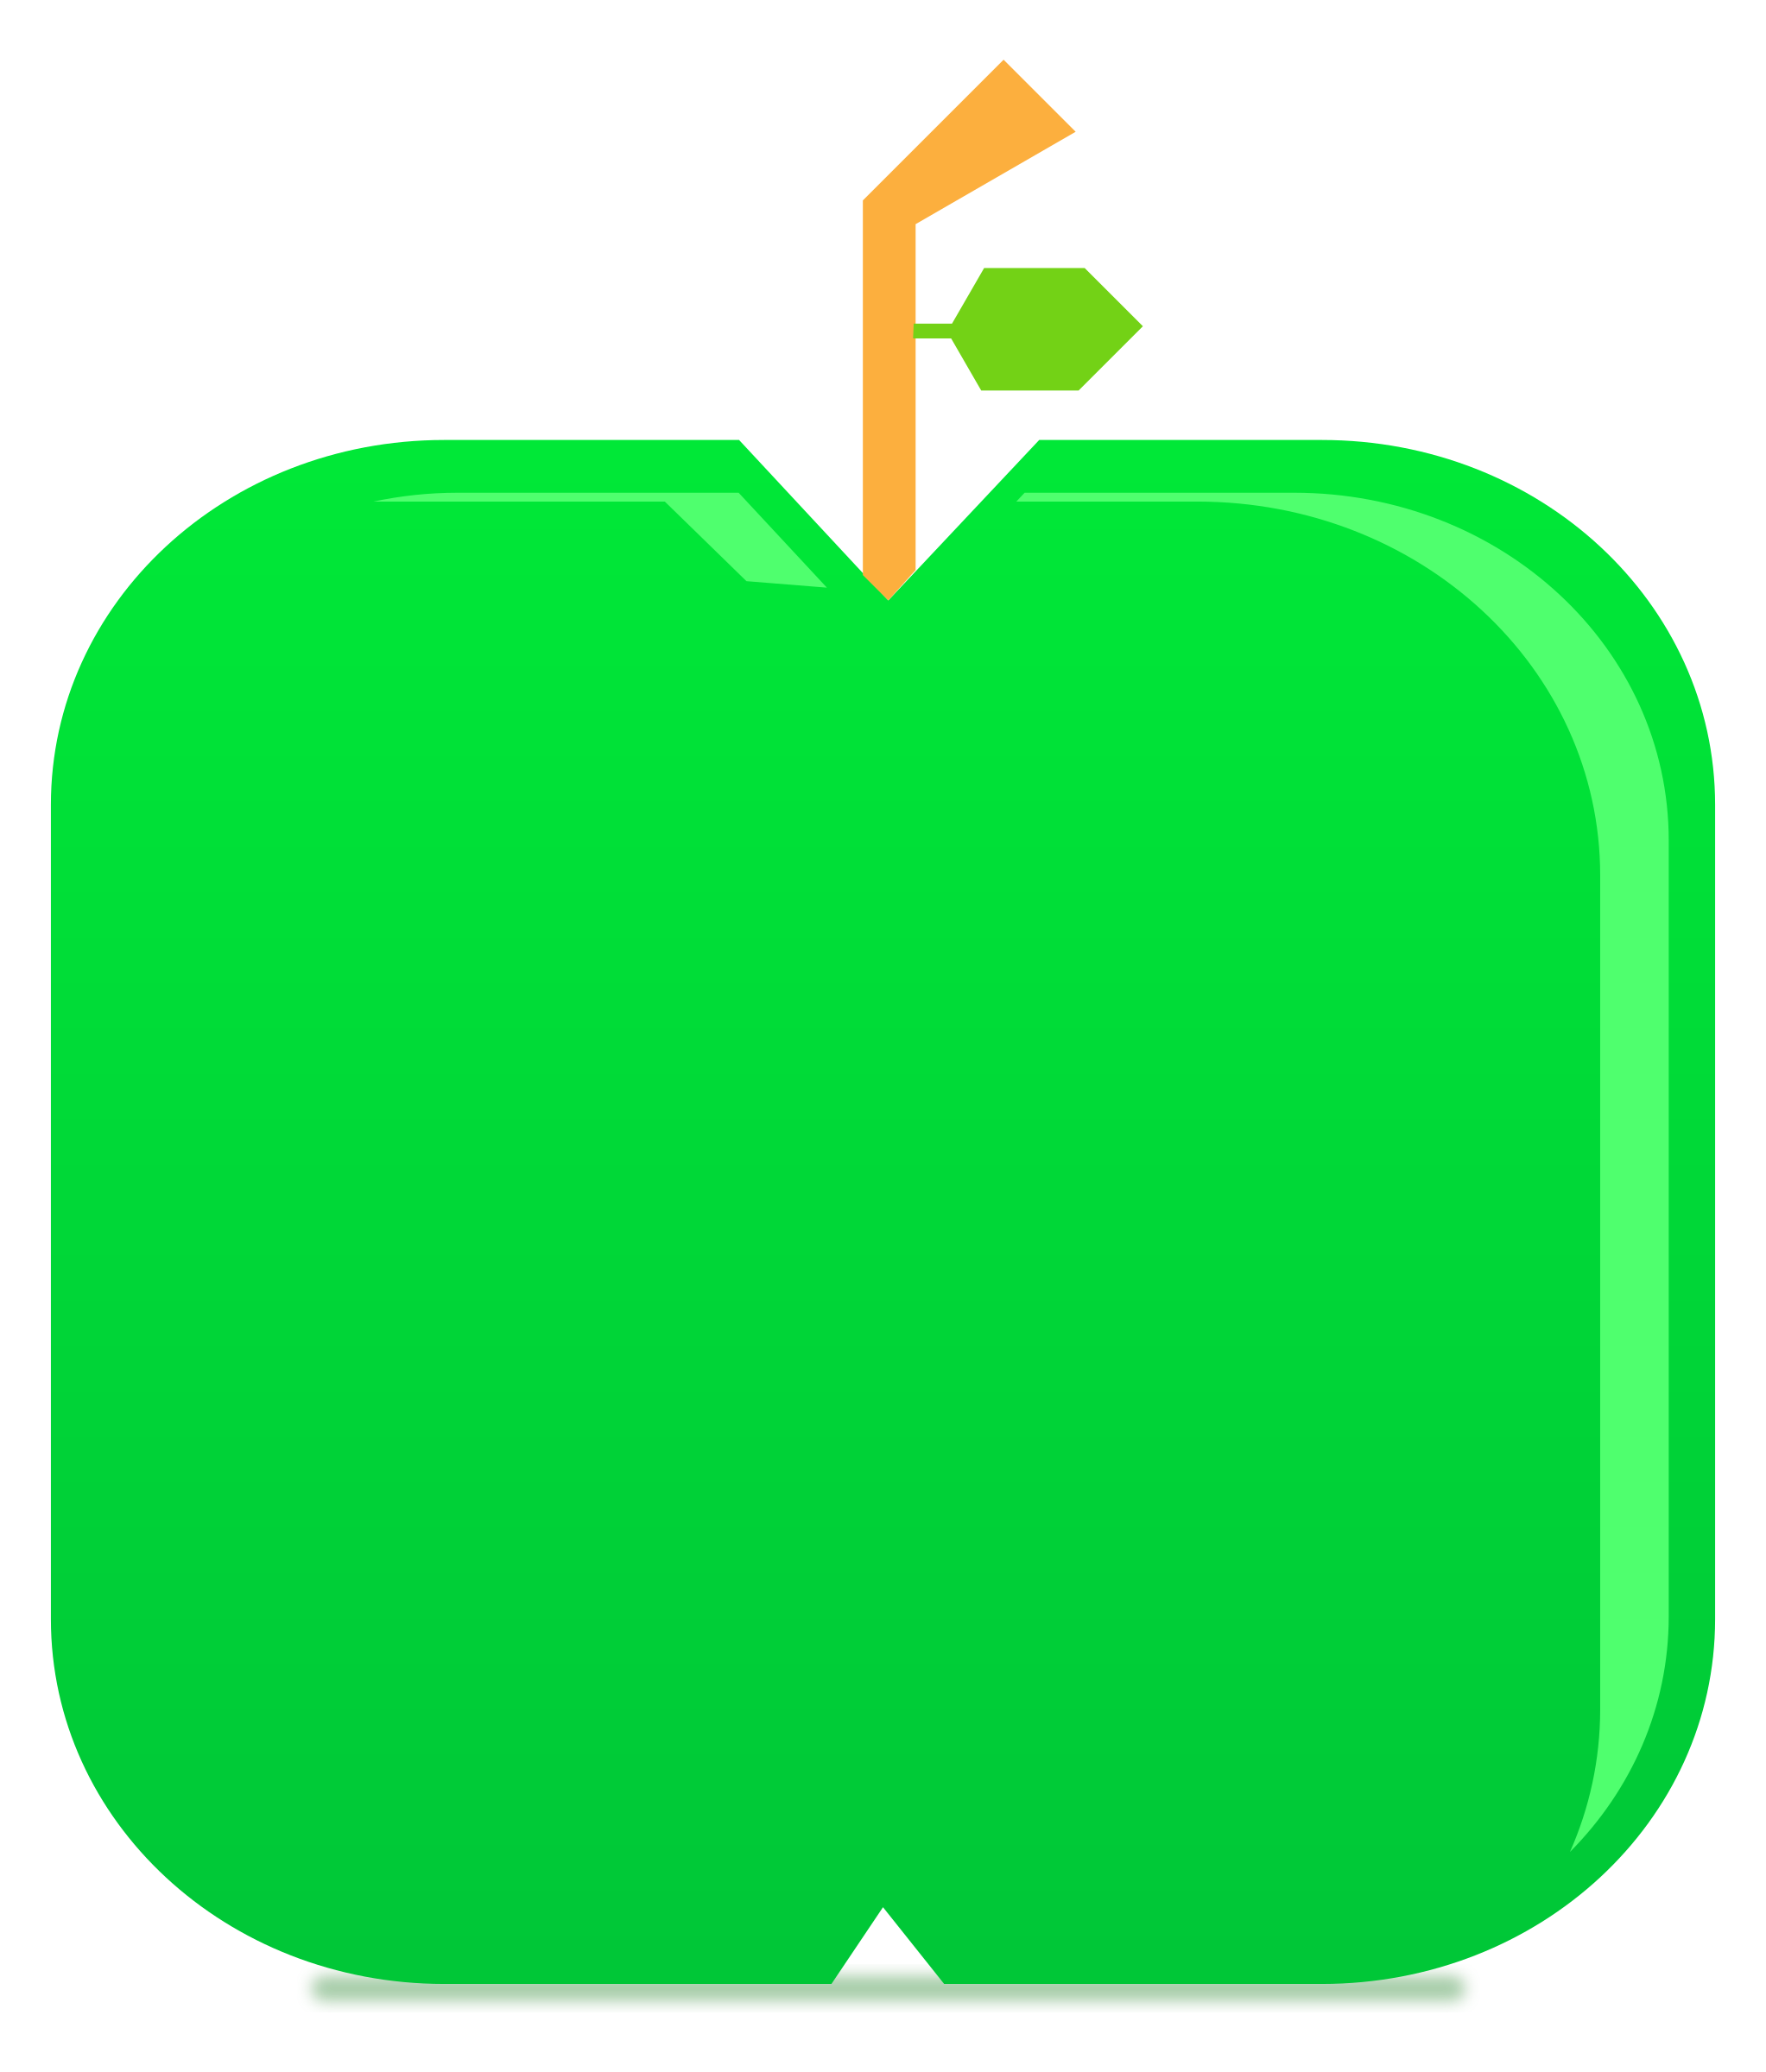 Download Flat Green Apple Vector Clipart image - Free stock photo - Public Domain photo - CC0 Images